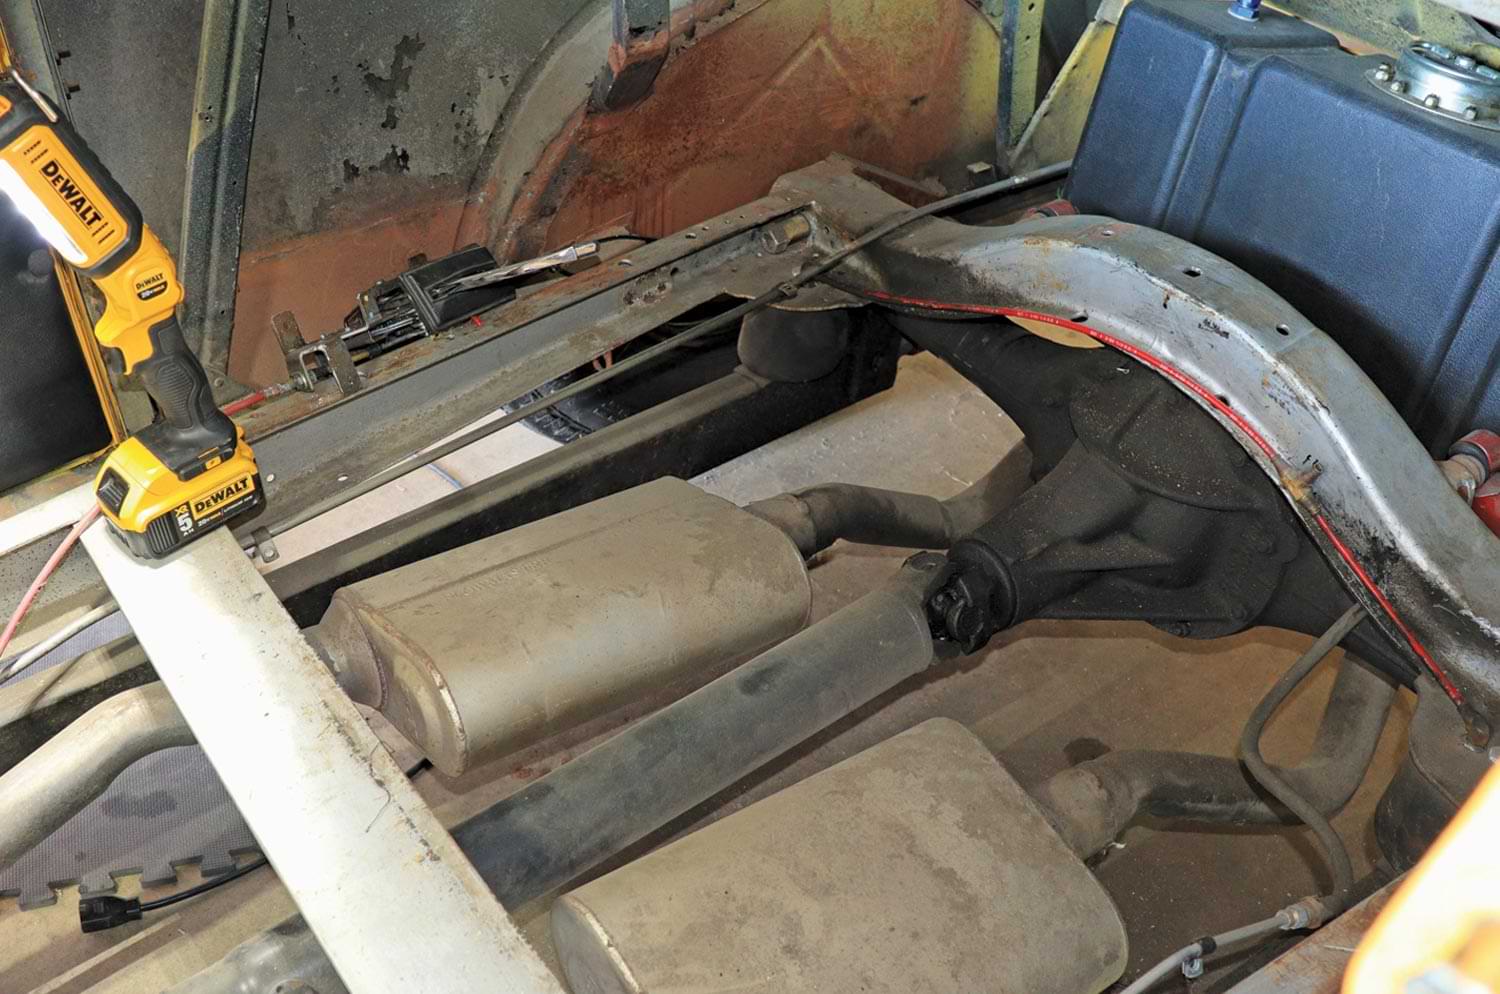 knowing this car will need repairs and suspension upgrades in the future, the 1-inch marine plywood floors were designed to be completely removable by undoing five screws